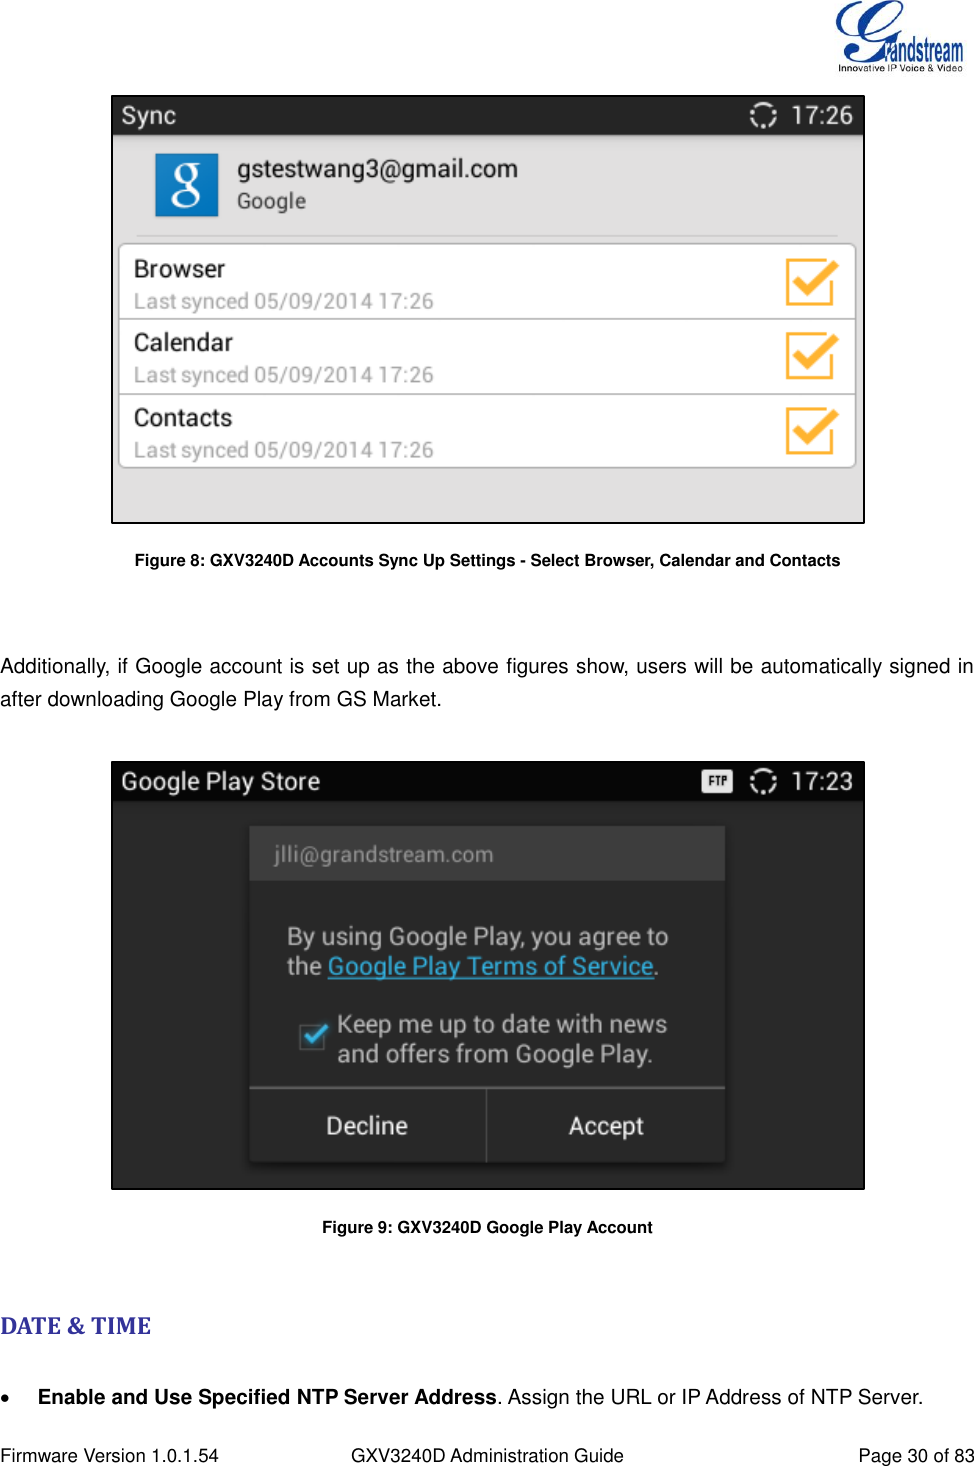  Firmware Version 1.0.1.54 GXV3240D Administration Guide Page 30 of 83   Figure 8: GXV3240D Accounts Sync Up Settings - Select Browser, Calendar and Contacts   Additionally, if Google account is set up as the above figures show, users will be automatically signed in after downloading Google Play from GS Market.   Figure 9: GXV3240D Google Play Account  DATE &amp; TIME   Enable and Use Specified NTP Server Address. Assign the URL or IP Address of NTP Server. 